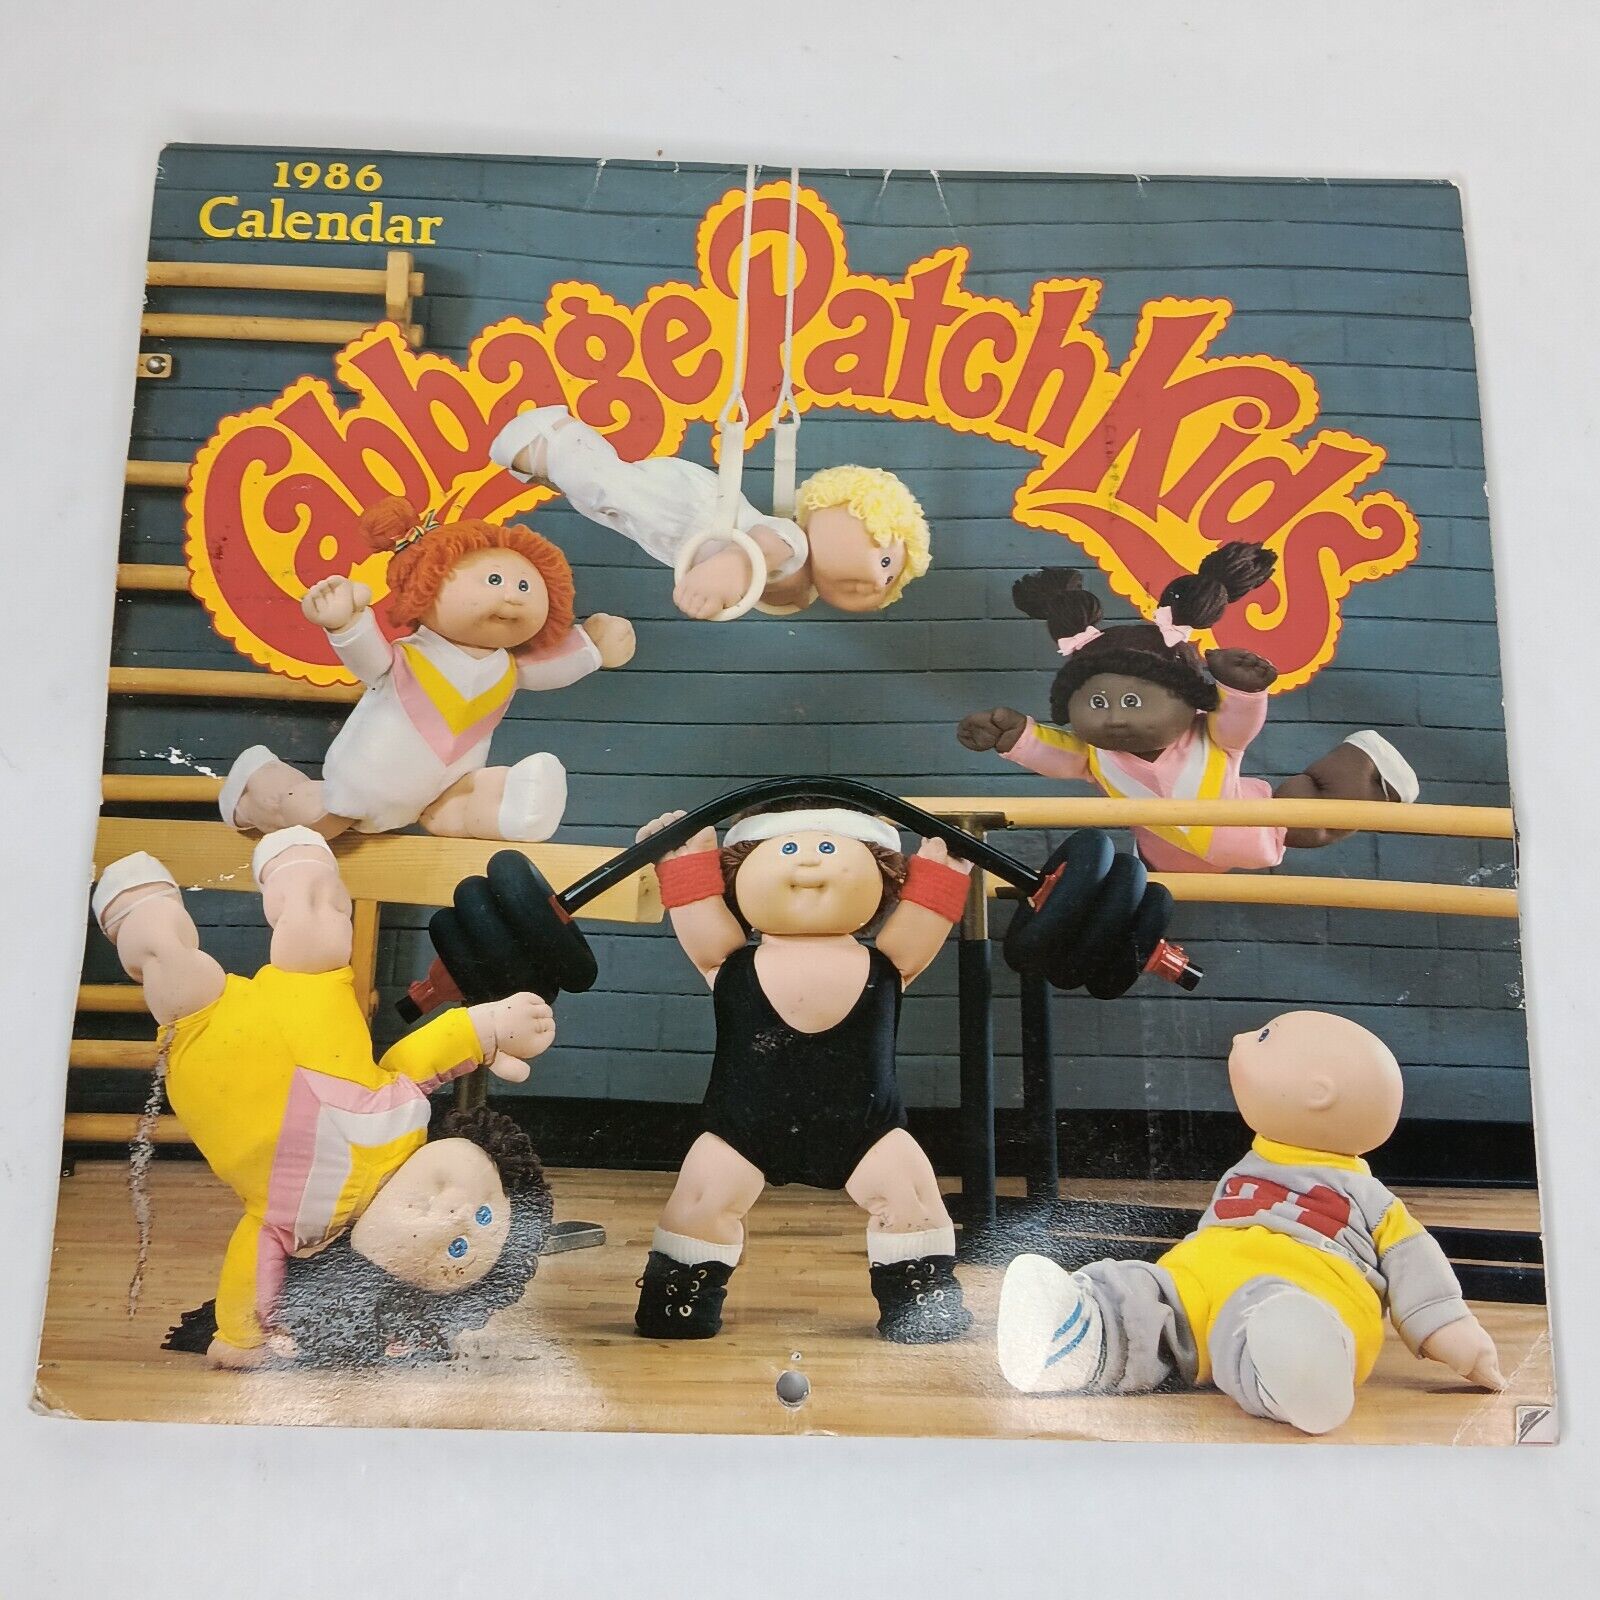 Vintage 1986 Cabbage Patch Kids Calendar With 1980 Sticker Collection Kids